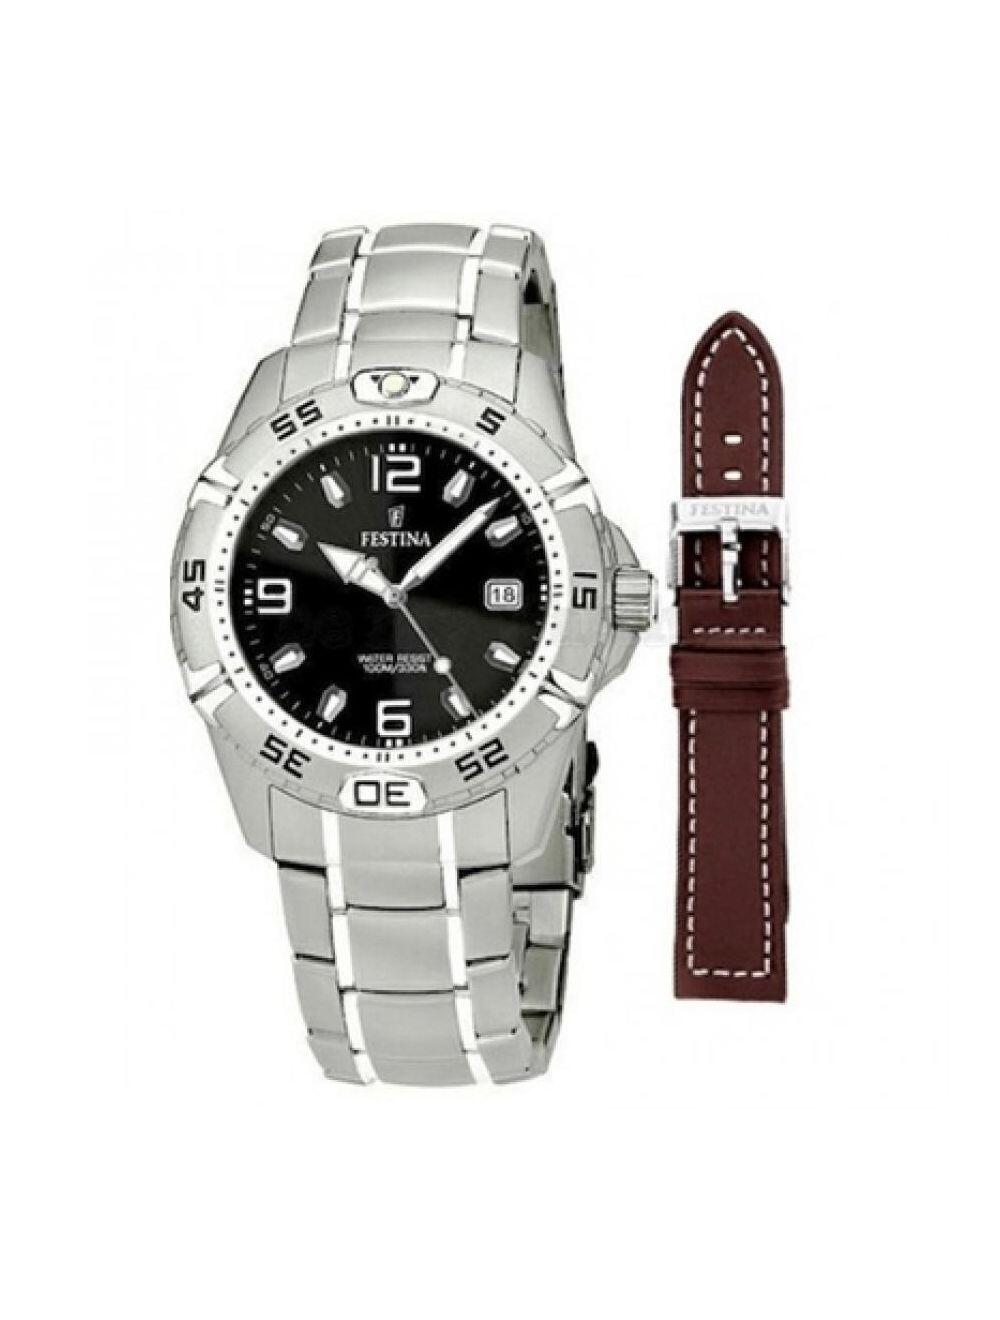 Festina Men's Watch with steel bracelet and second leather strap